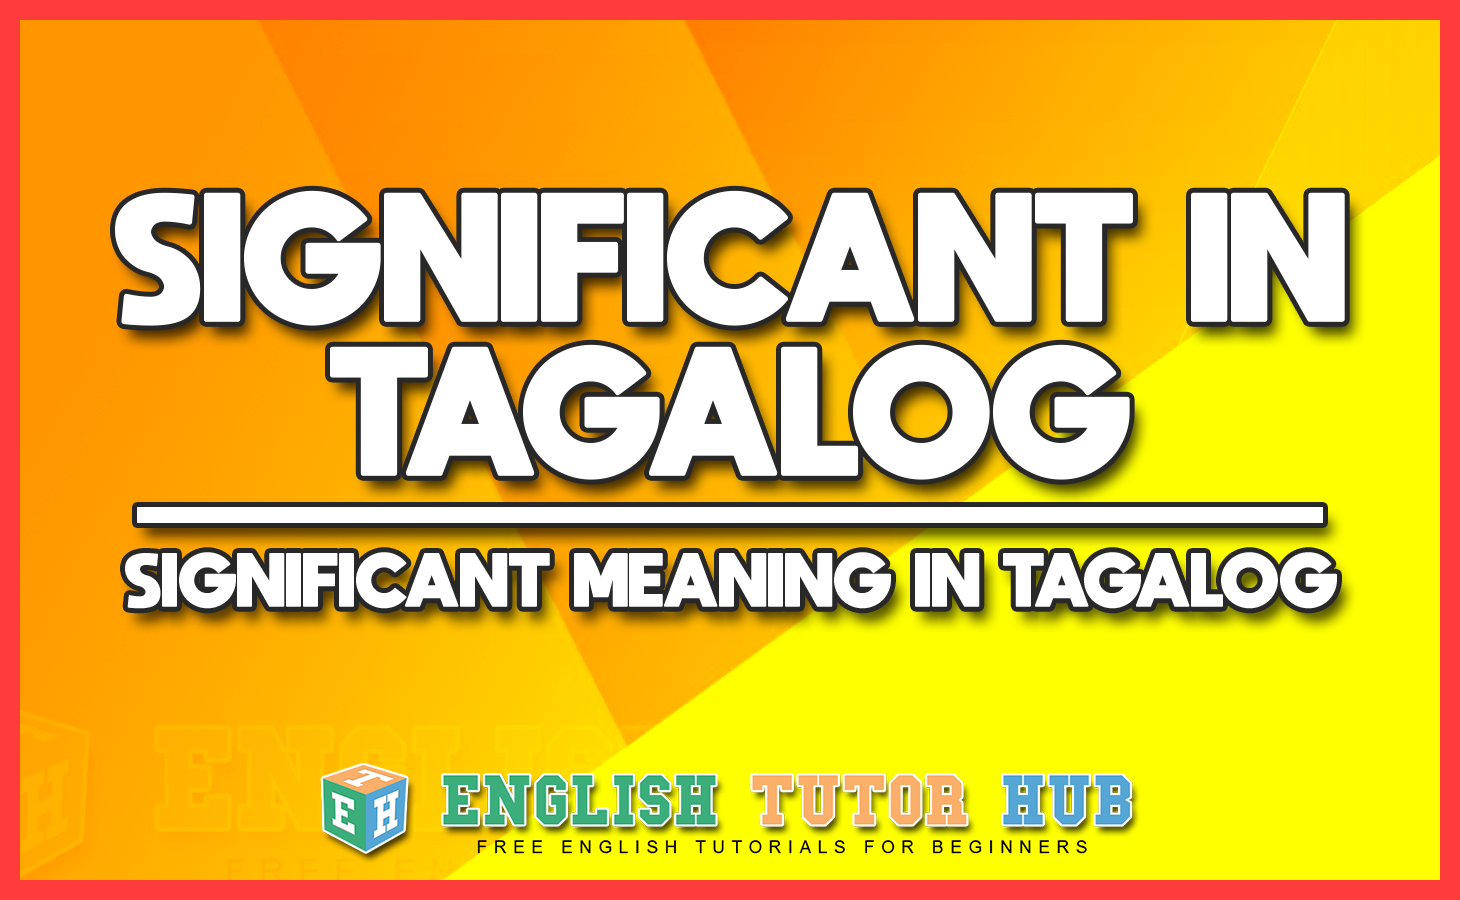 SIGNIFICANT IN TAGALOG - SIGNIFICANT MEANING IN TAGALOG